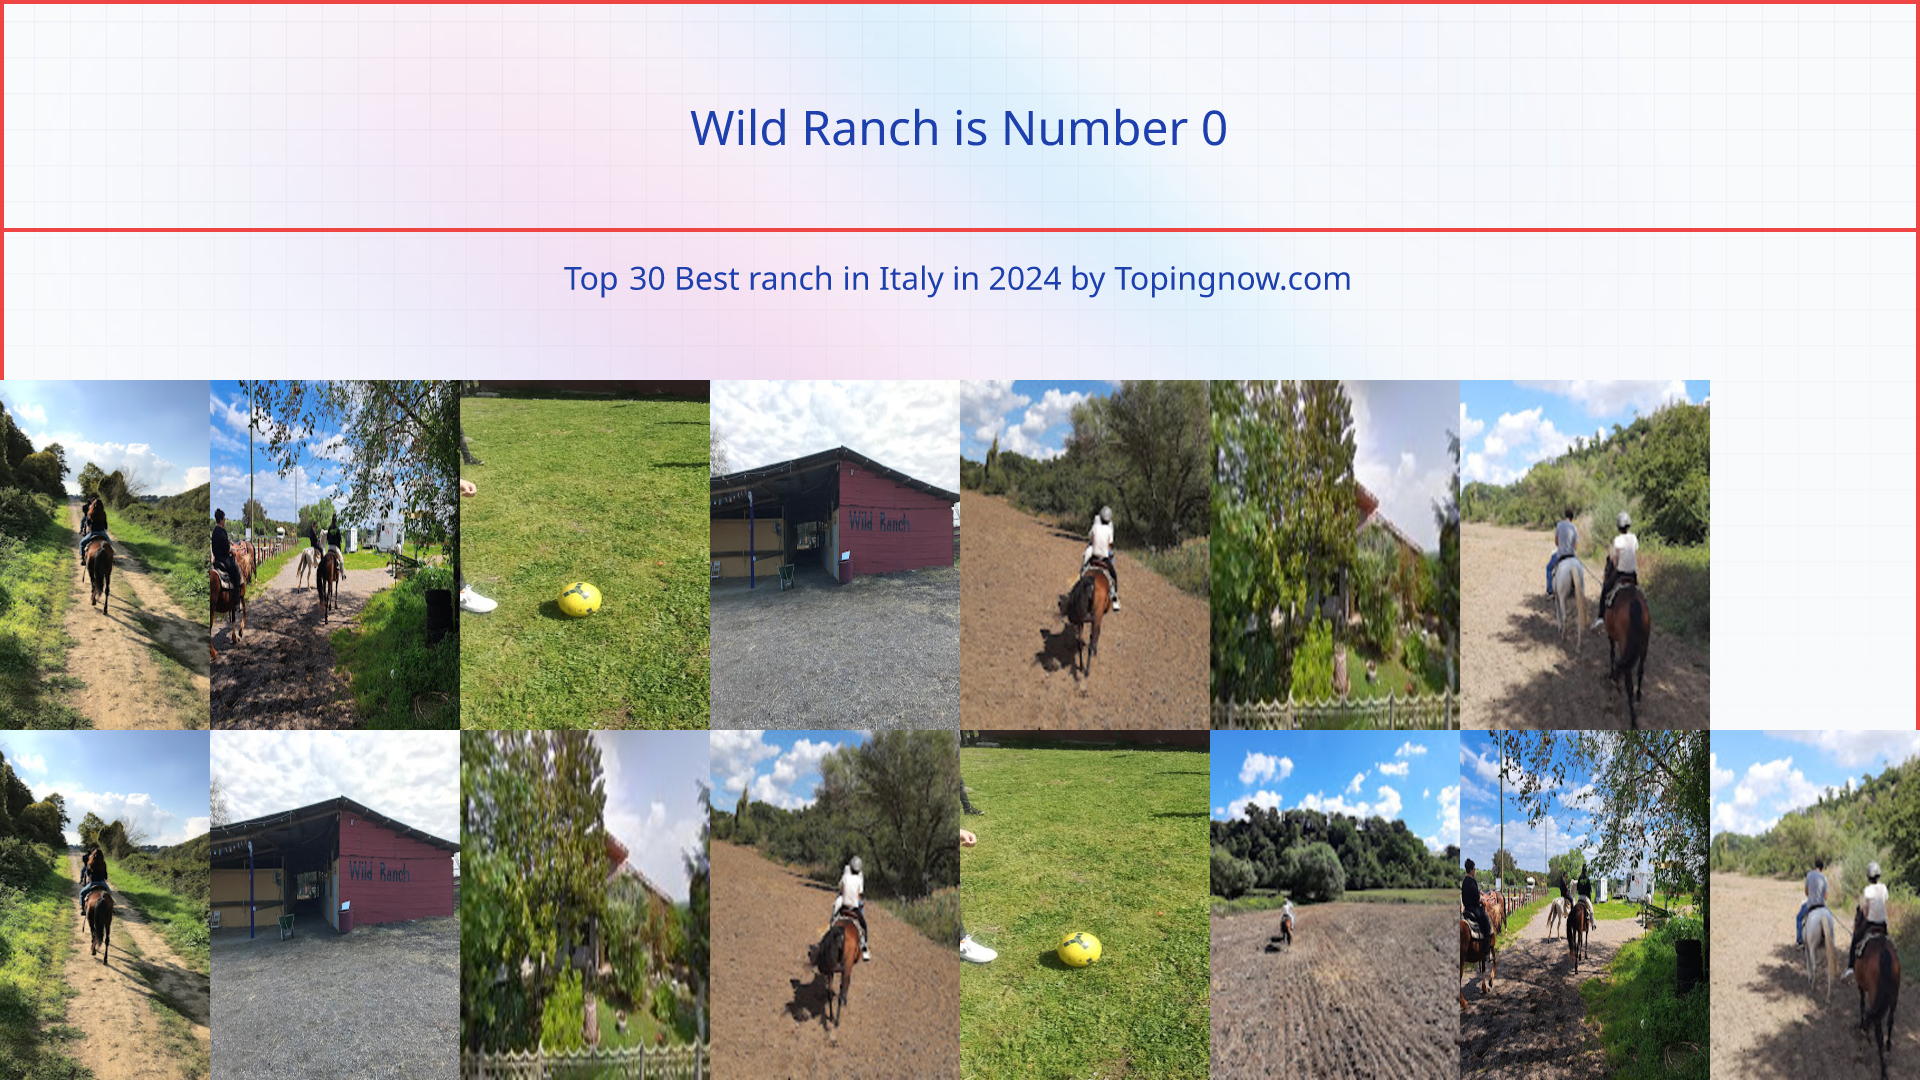 Wild Ranch: Top 30 Best ranch in Italy in 2024